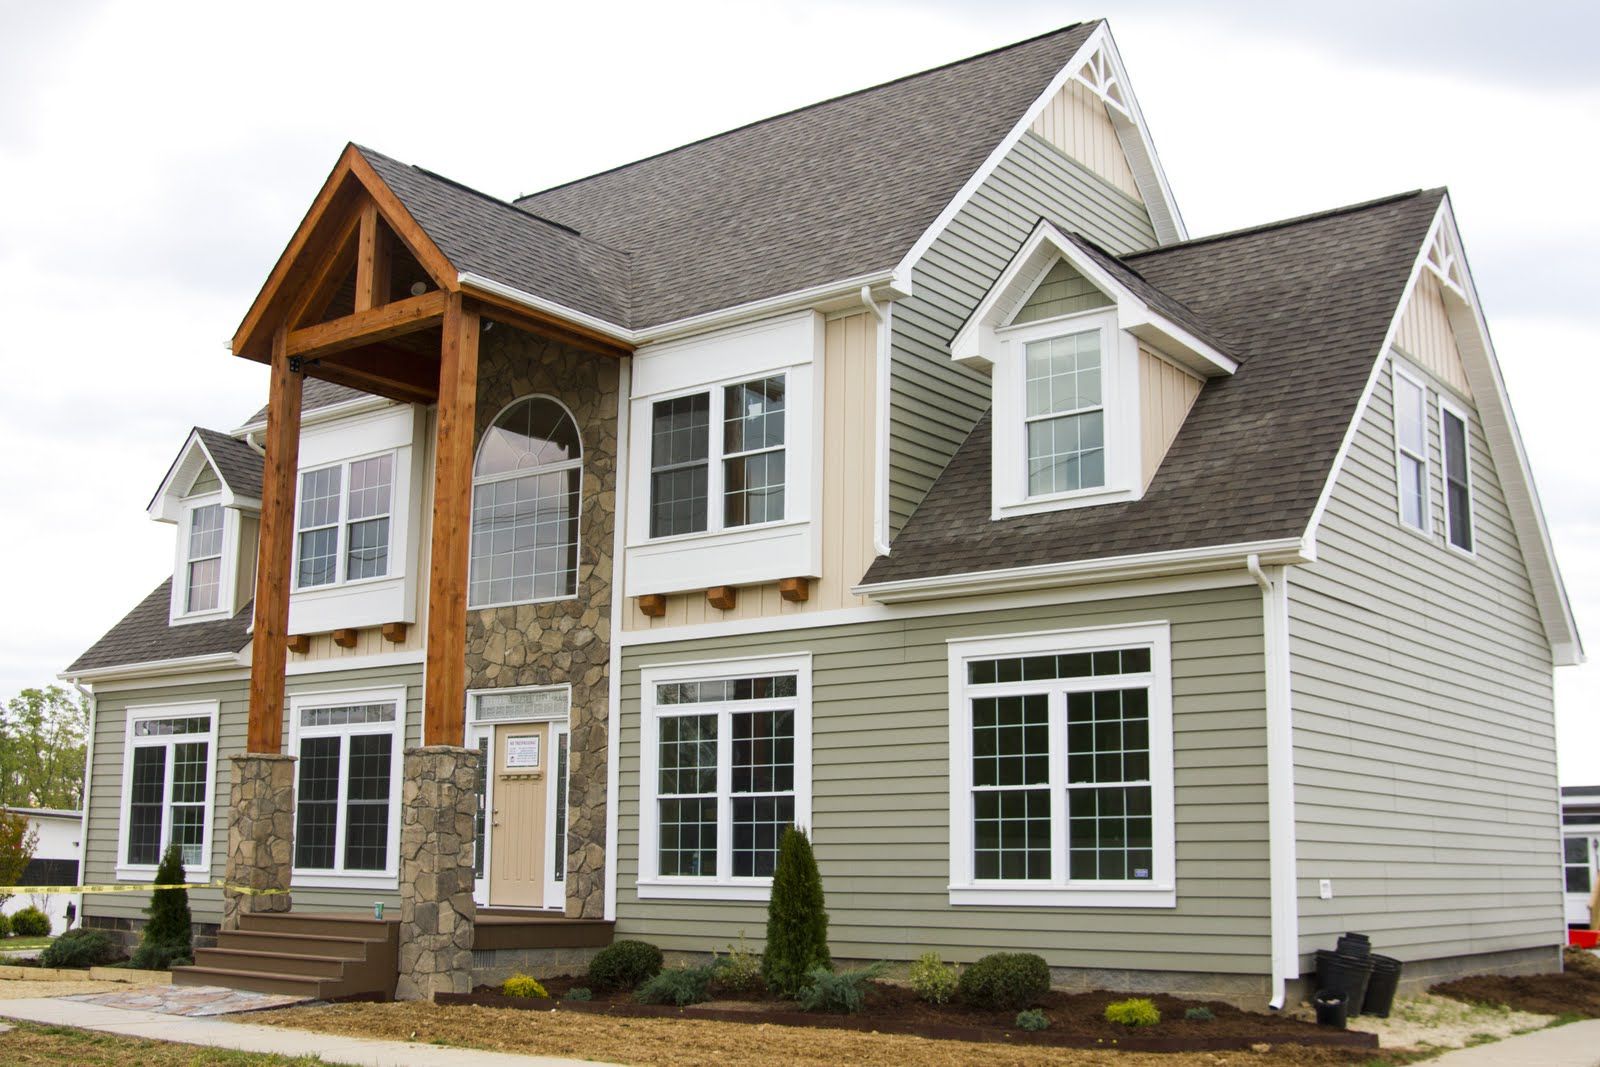 MODULAR HOME BUILDER: Nationwide Homes Opens Interactive Model Home